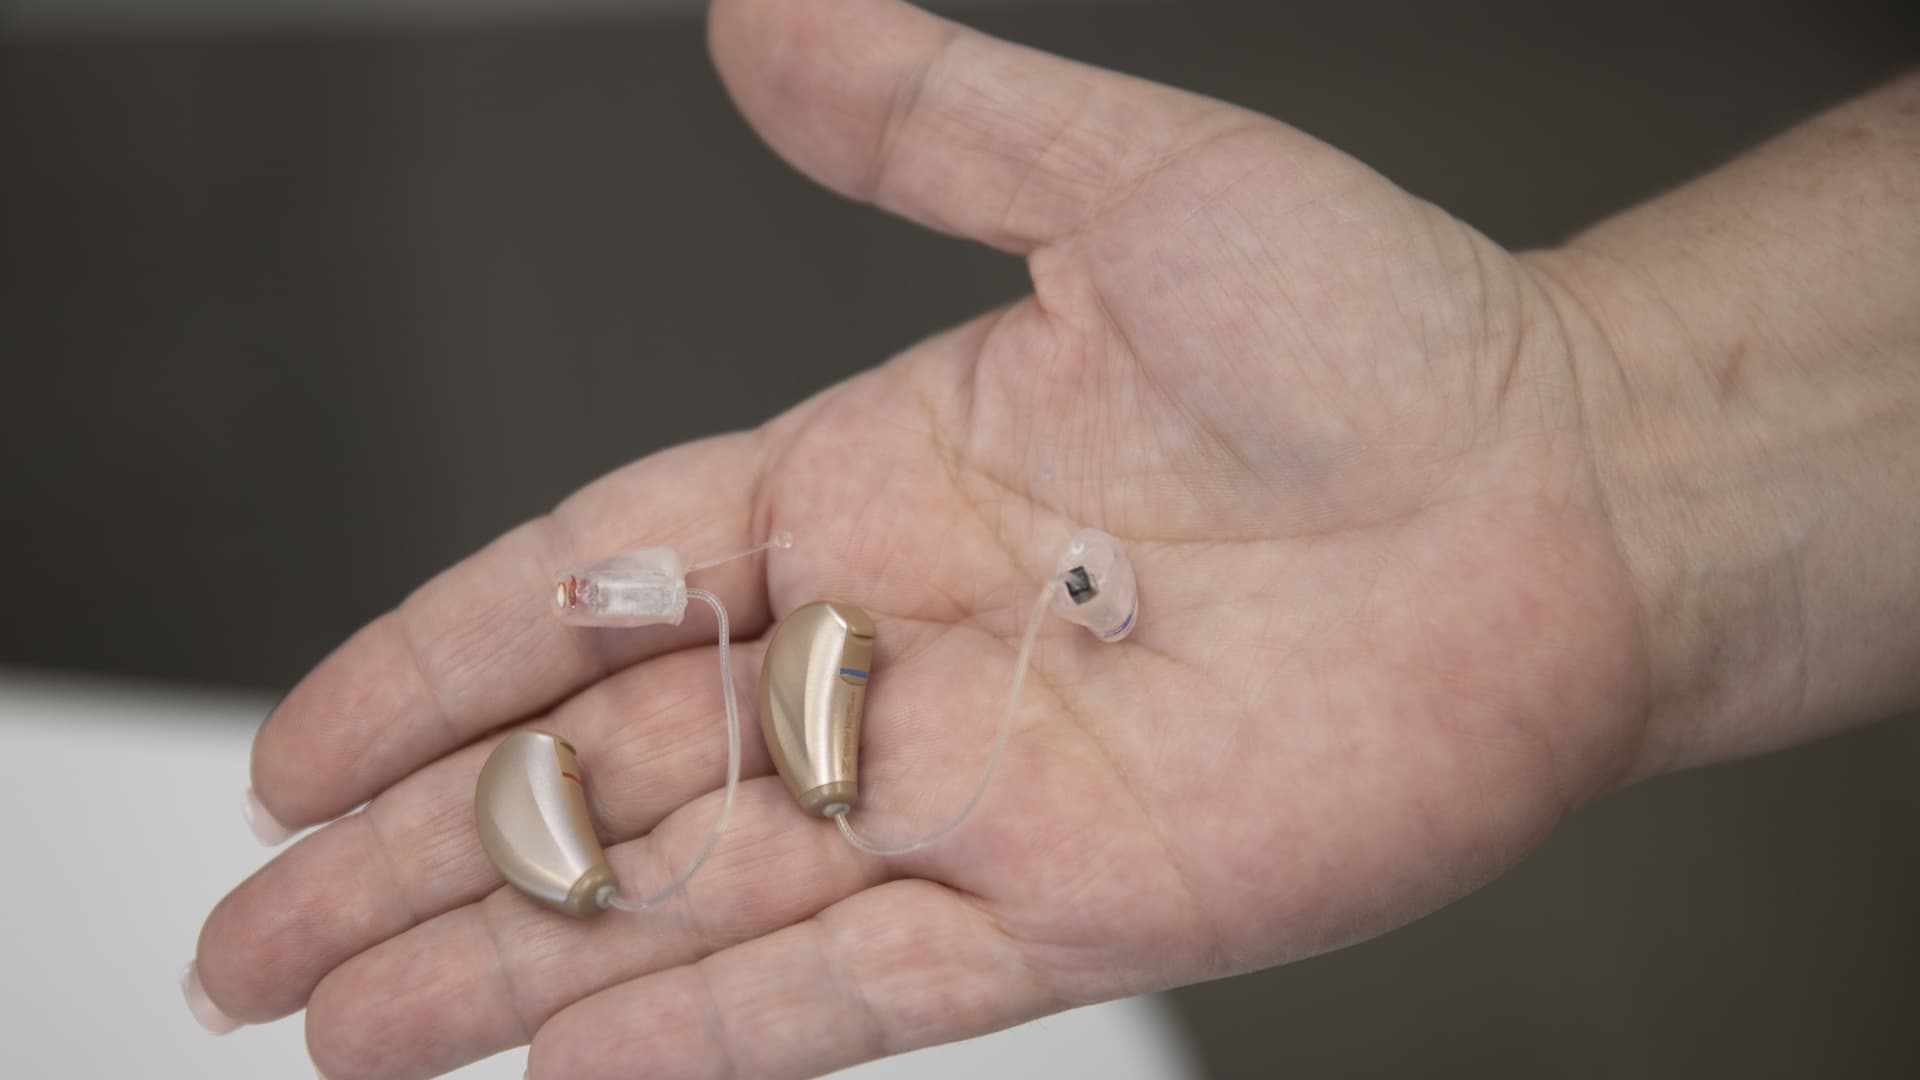 Hearing aids are now available over the counter from Walgreens, CVS and Best Buy